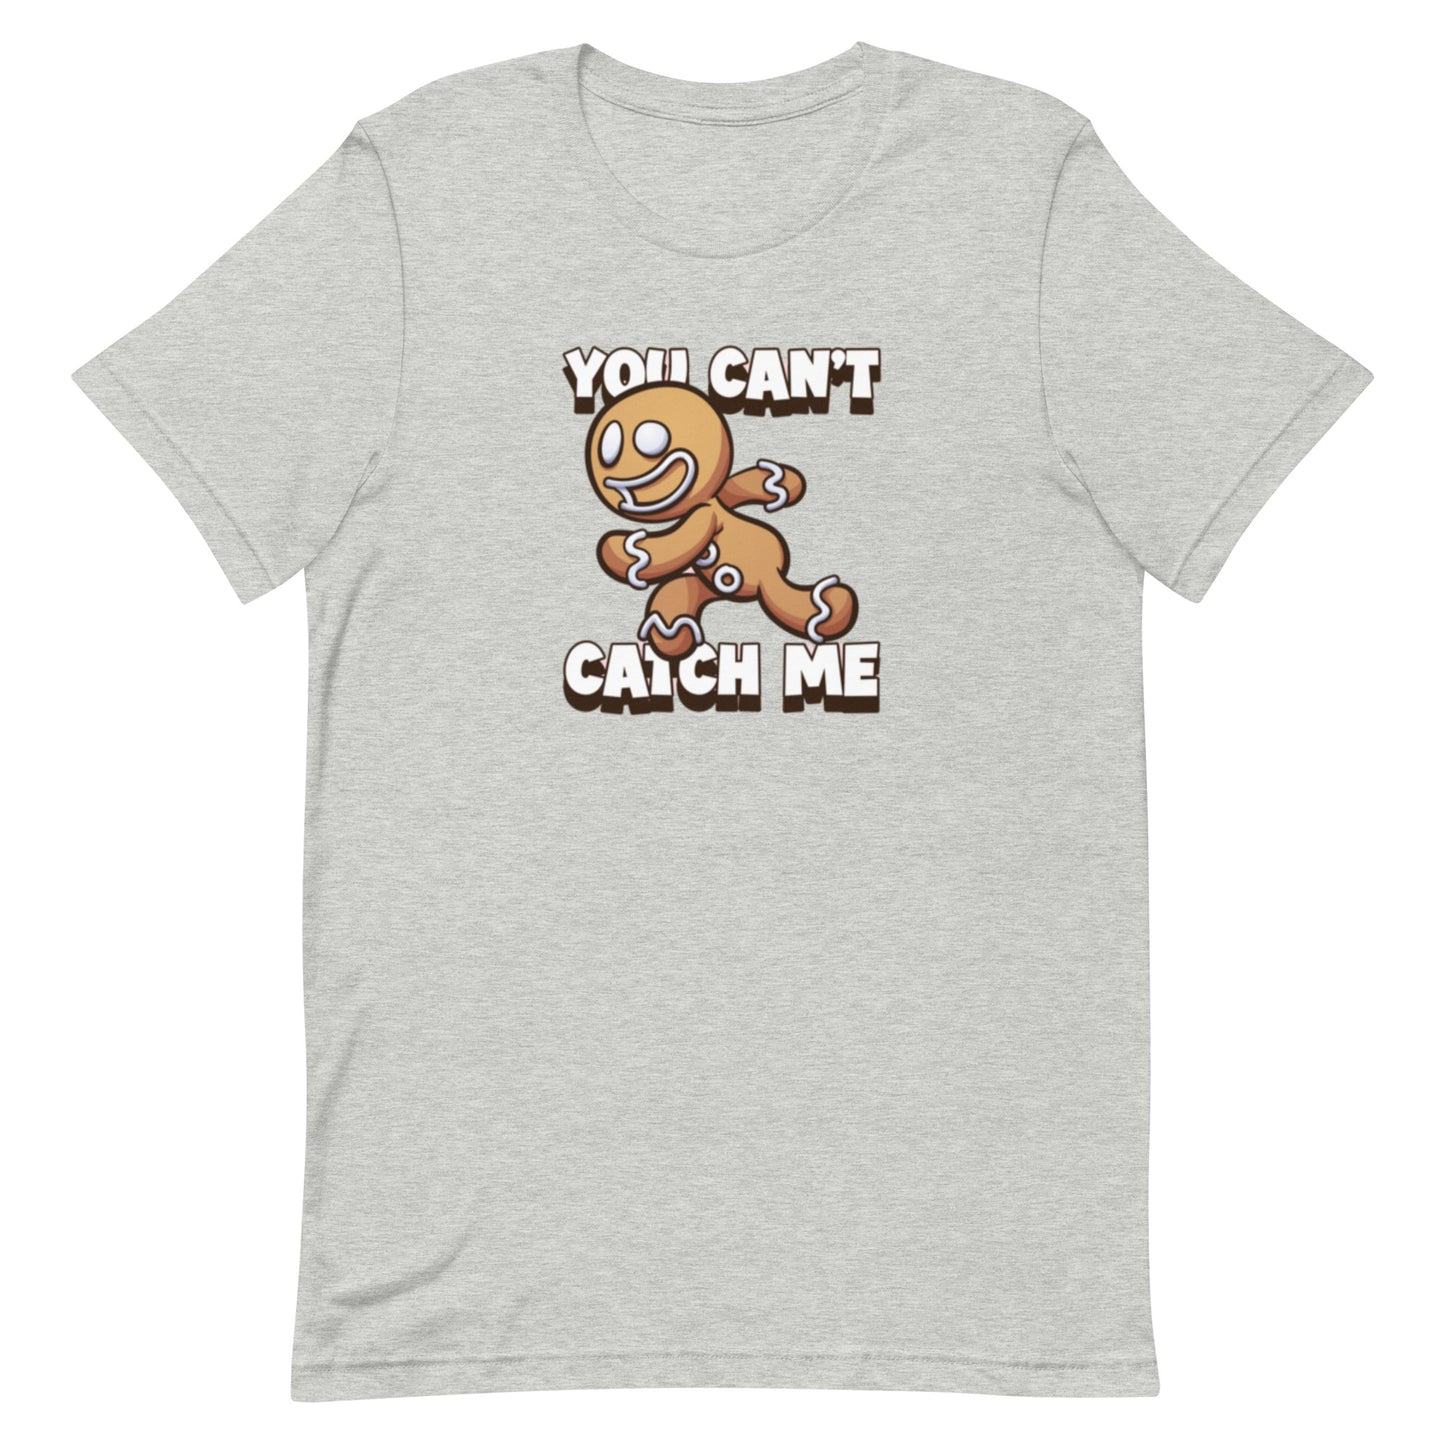 Holiday T-shirt in You Can't Catch Me